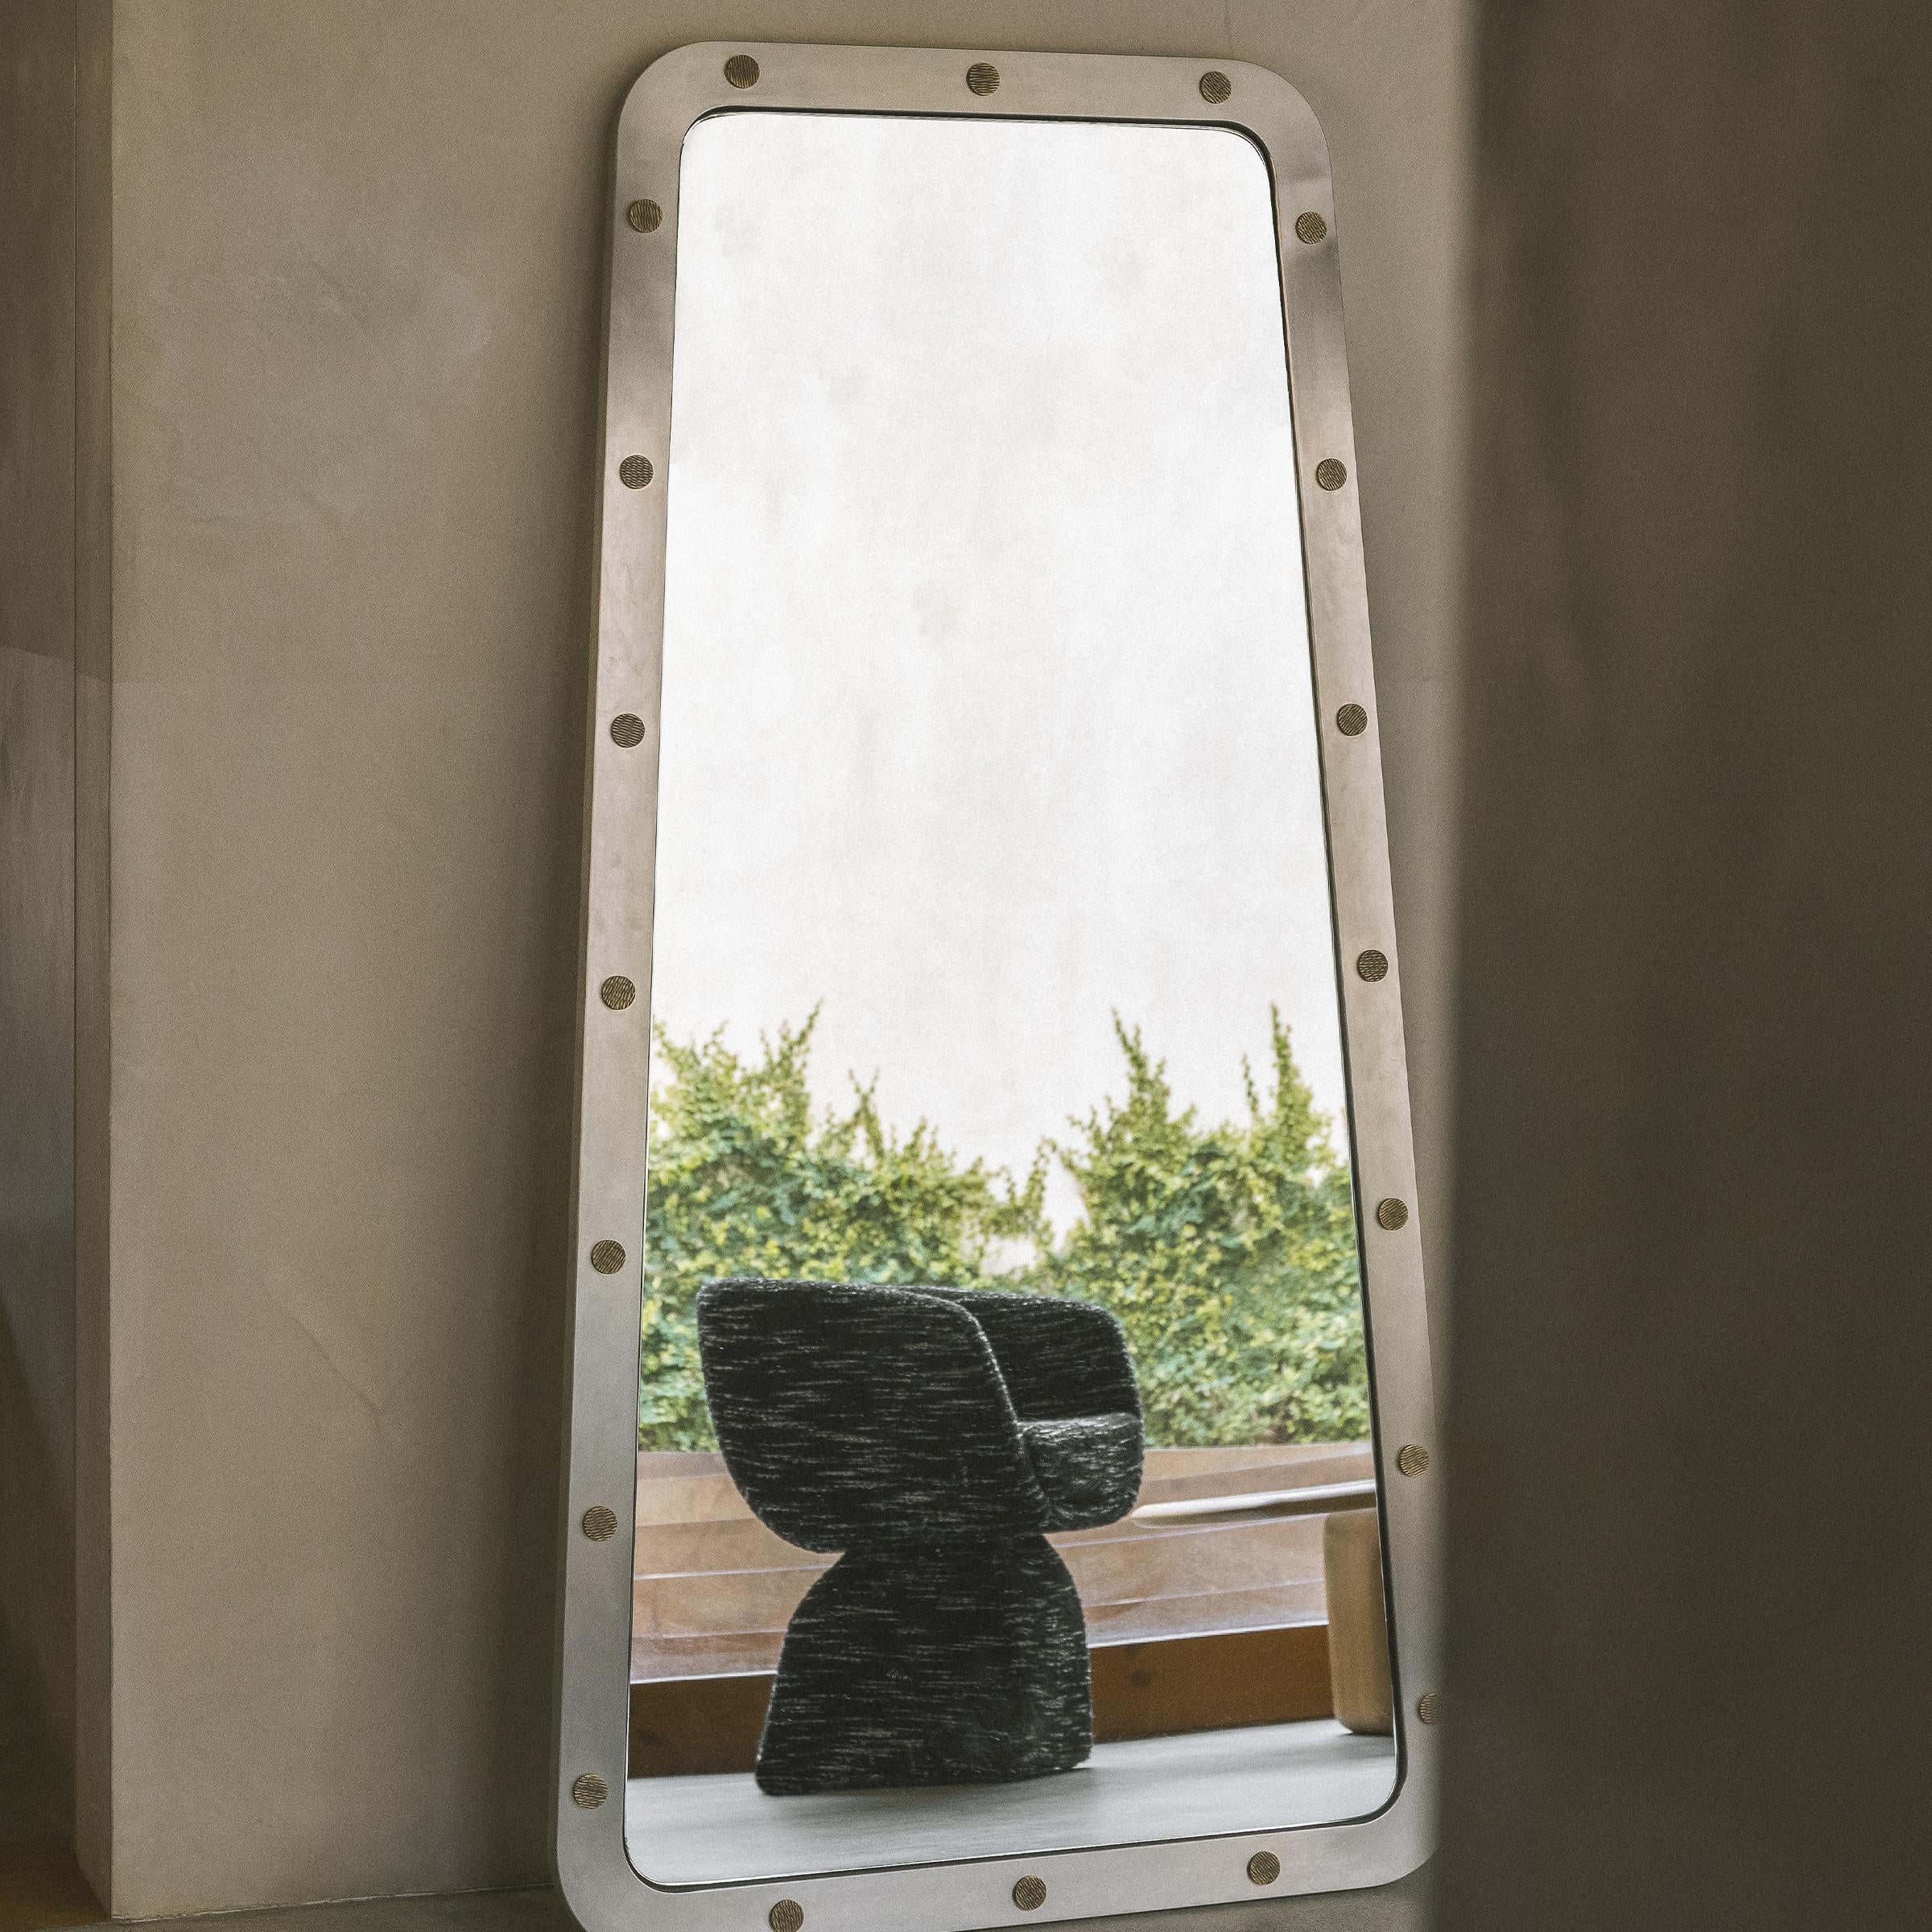 Cluster Mirror by DUISTT 
Dimensions: W 88 x D 4 x H 170 cm
Materials: Brushed Stainless Steel and Light Bronze Details

CLUSTER mirror, crafted with great attention to detail, has a brushed stainless steel structure and light bronze details. With